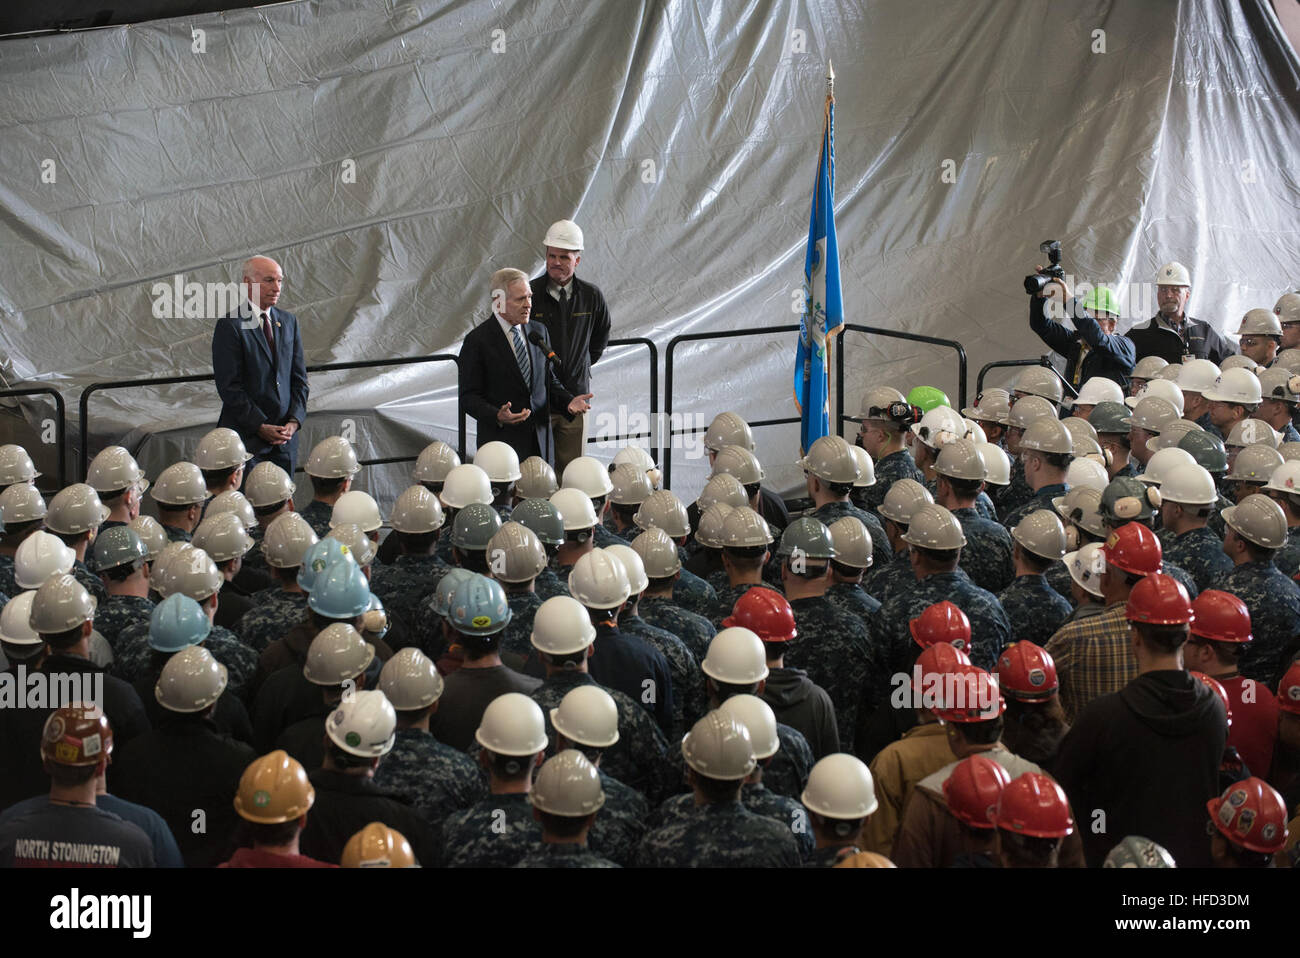 GROTON, Conn. (Oct. 13, 2016) Secretary of the Navy (SECNAV) Ray Mabus holds an all-hands call for Sailors and shipyard employees at General Dynamics Electric Boat. During the all-hands call Mabus discussed the status of shipbuilding and personnel management within the Department of the Navy. (U.S. Navy photo by Petty Officer 1st Class Armando Gonzales/Released) 161013-N-LV331-001 Join the conversation: http://www.navy.mil/viewGallery.asp http://www.facebook.com/USNavy http://www.twitter.com/USNavy http://navylive.dodlive.mil http://pinterest.com https://plus.google.com SECNAV Ray Mabus holds  Stock Photo